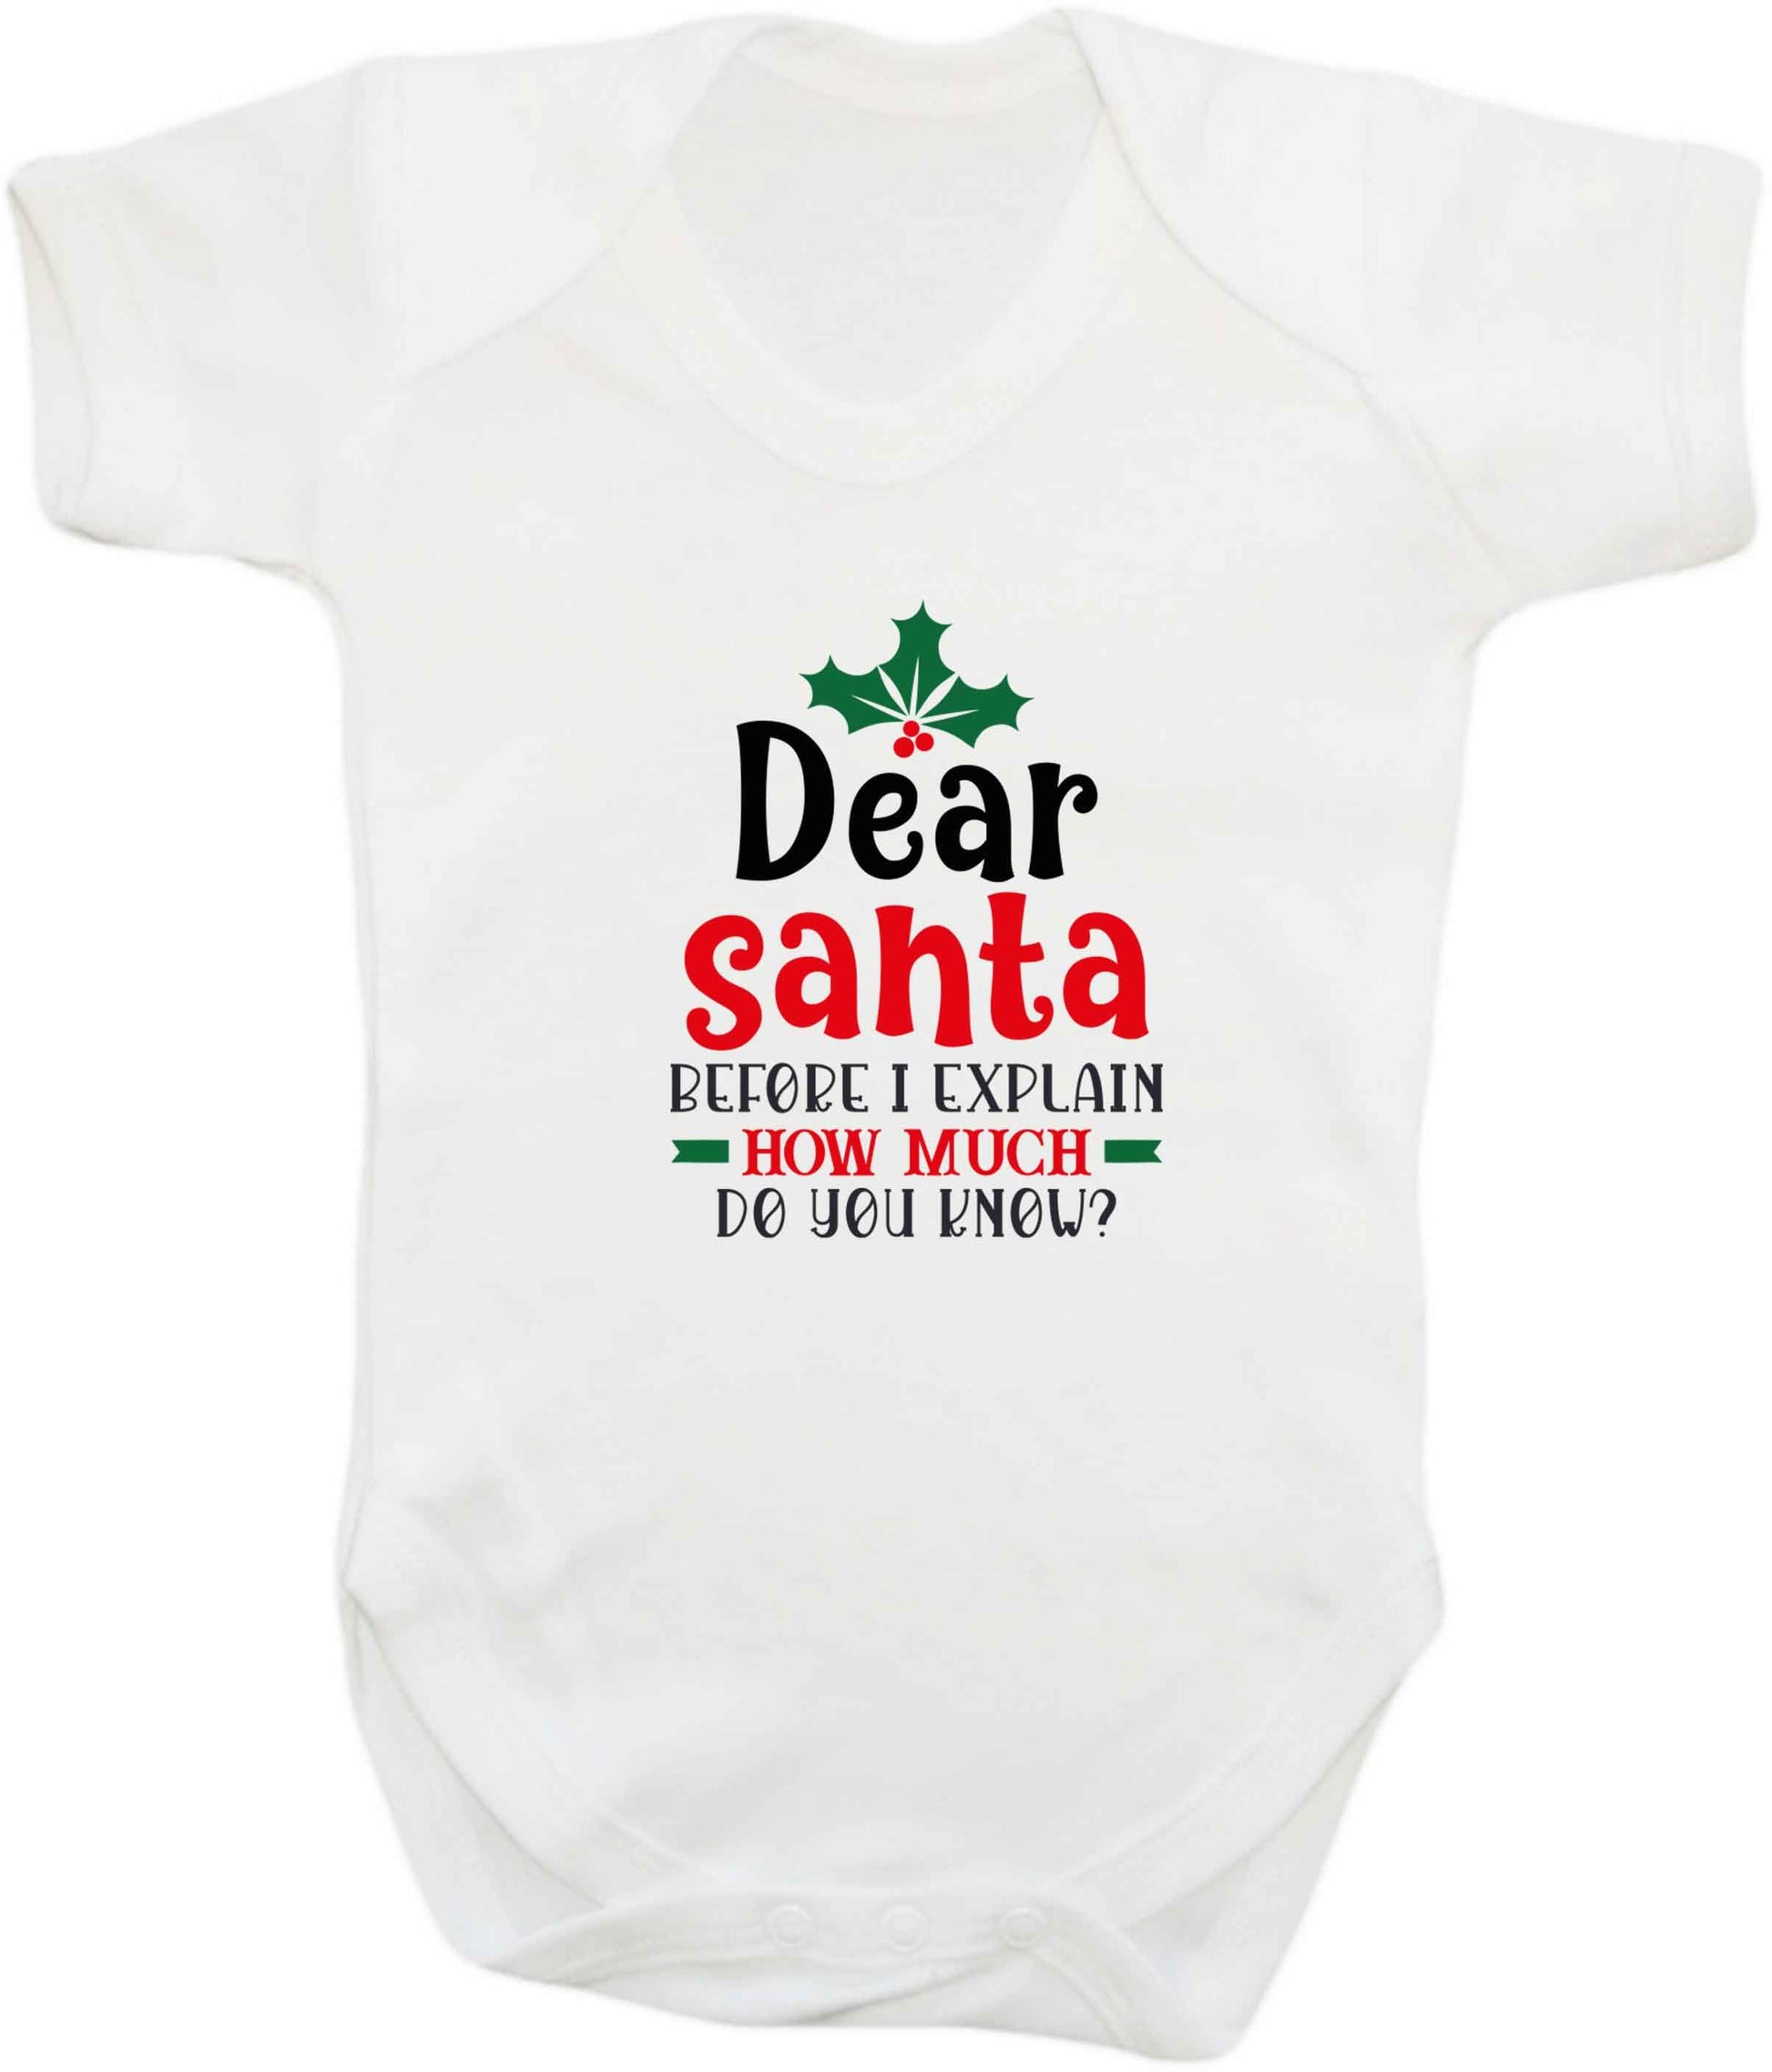 Santa before I explain how much do you know? baby vest white 18-24 months